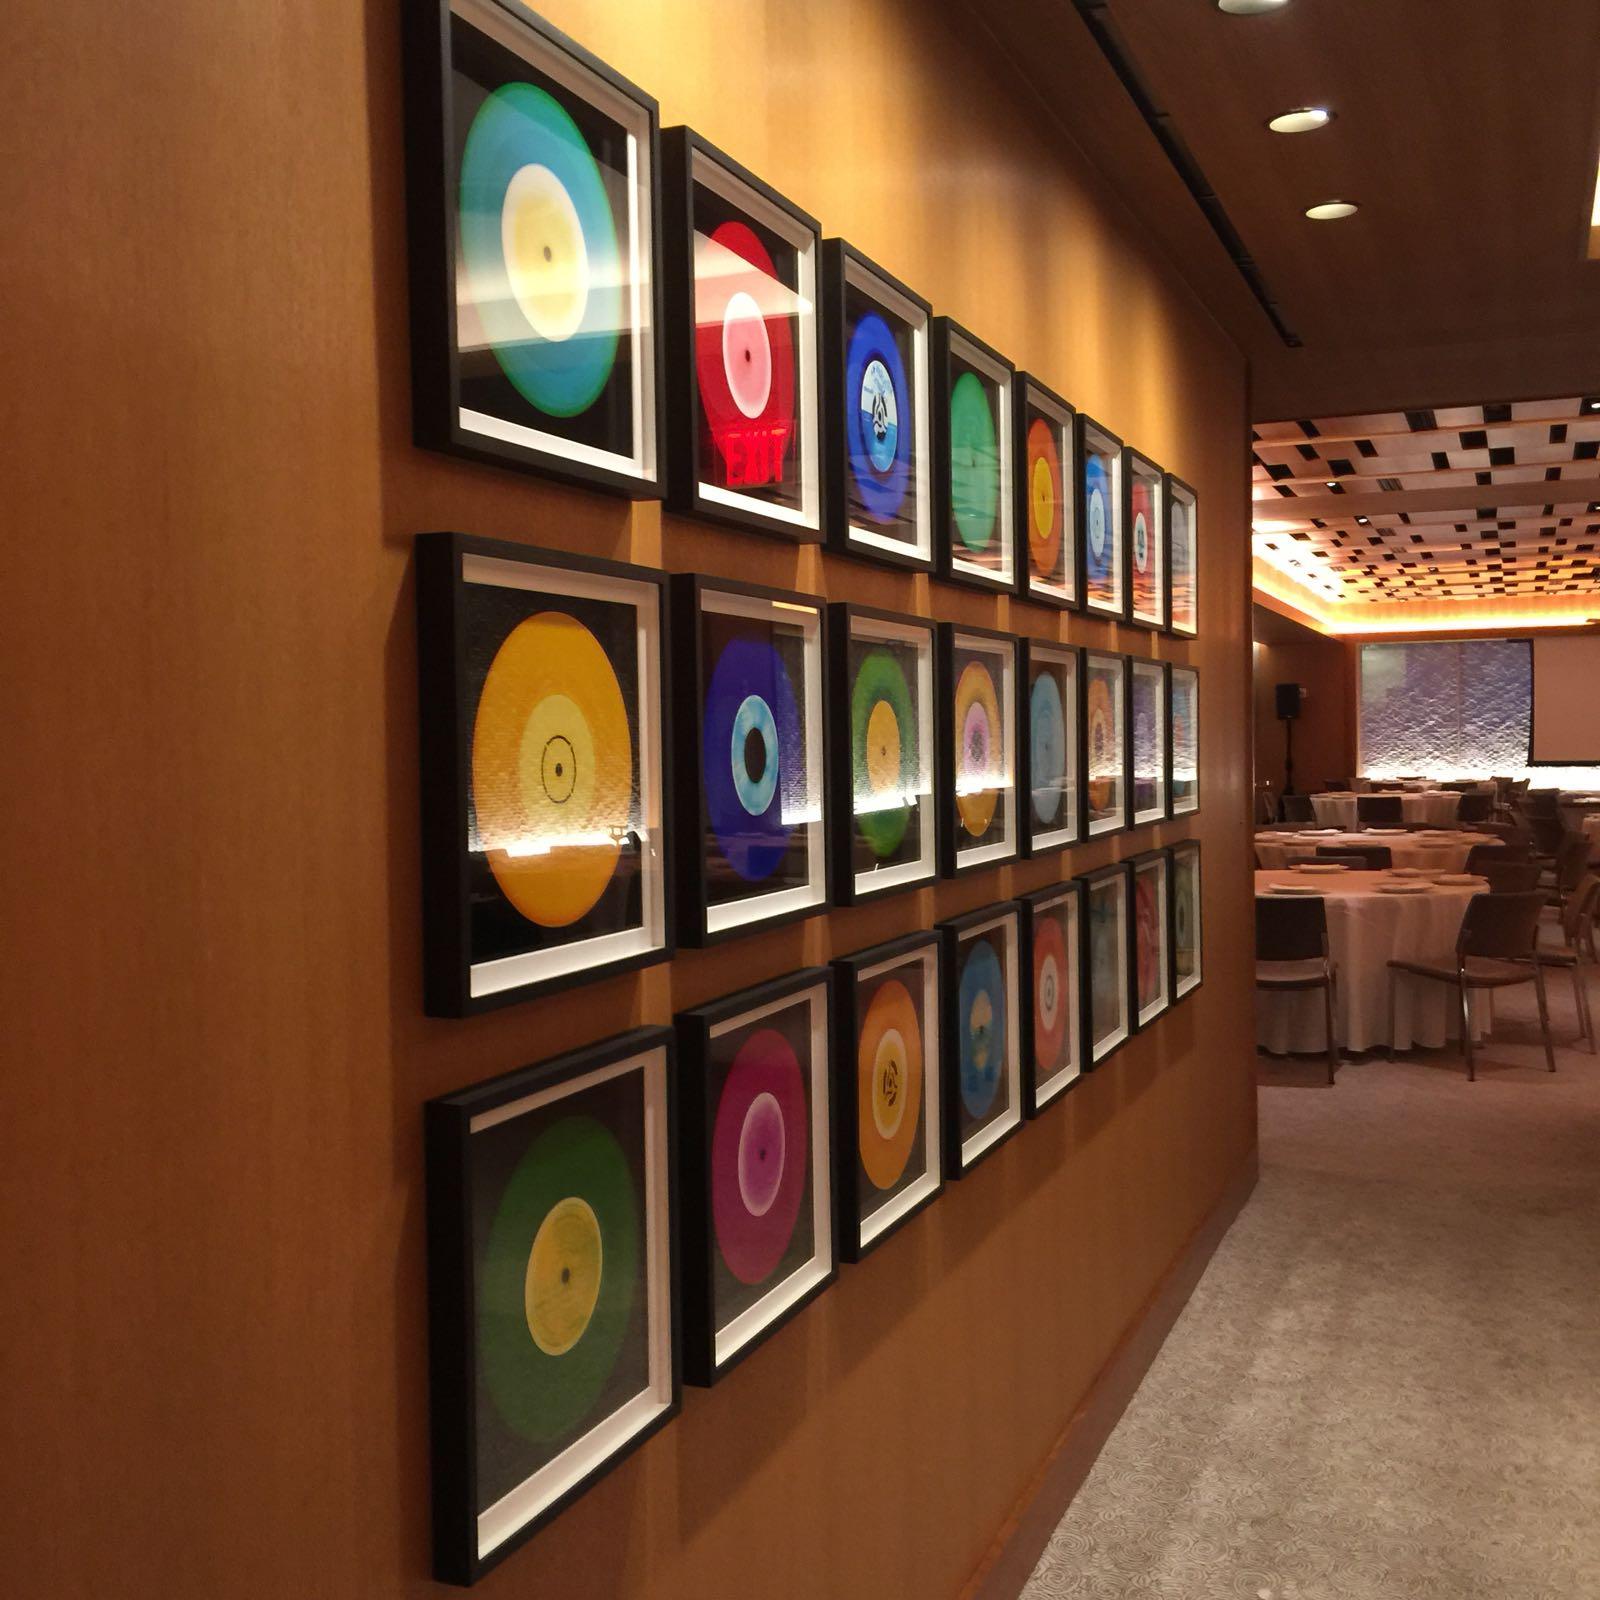 Heidler & Heeps Vinyl Collection Twenty-Four Piece Multi-Color Installation.
Acclaimed contemporary photographers, Richard Heeps and Natasha Heidler have collaborated to make this beautifully mesmerising collection. A celebration of the vinyl record